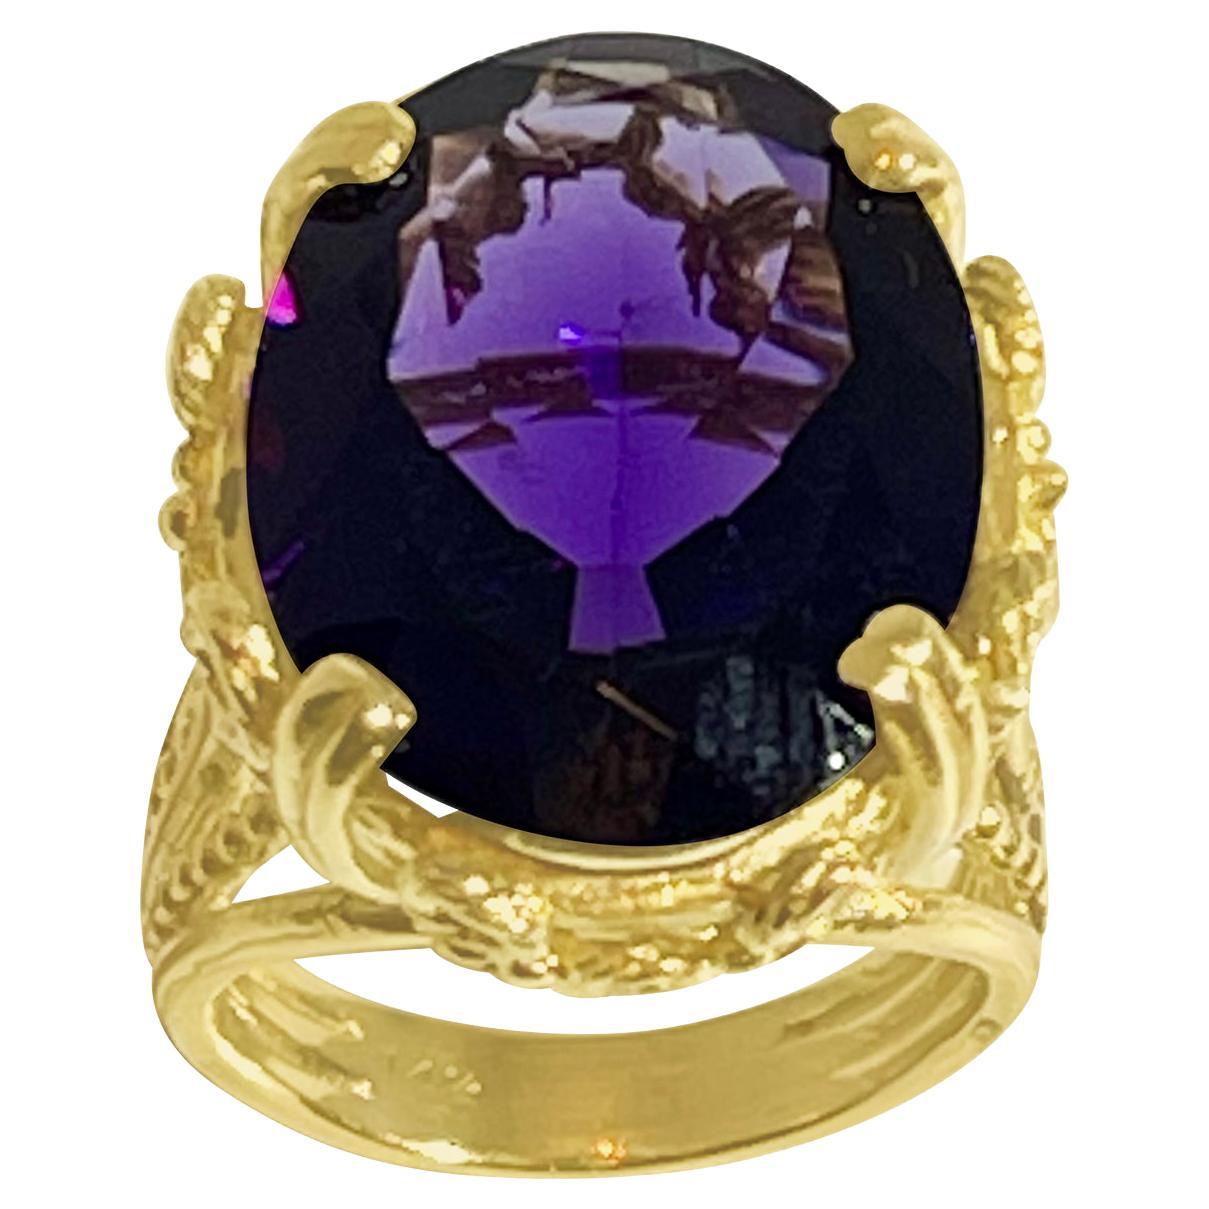 13 Carat Oval Bolivian Amethyst Cocktail Ring in 14 Karat Yellow Gold For Sale